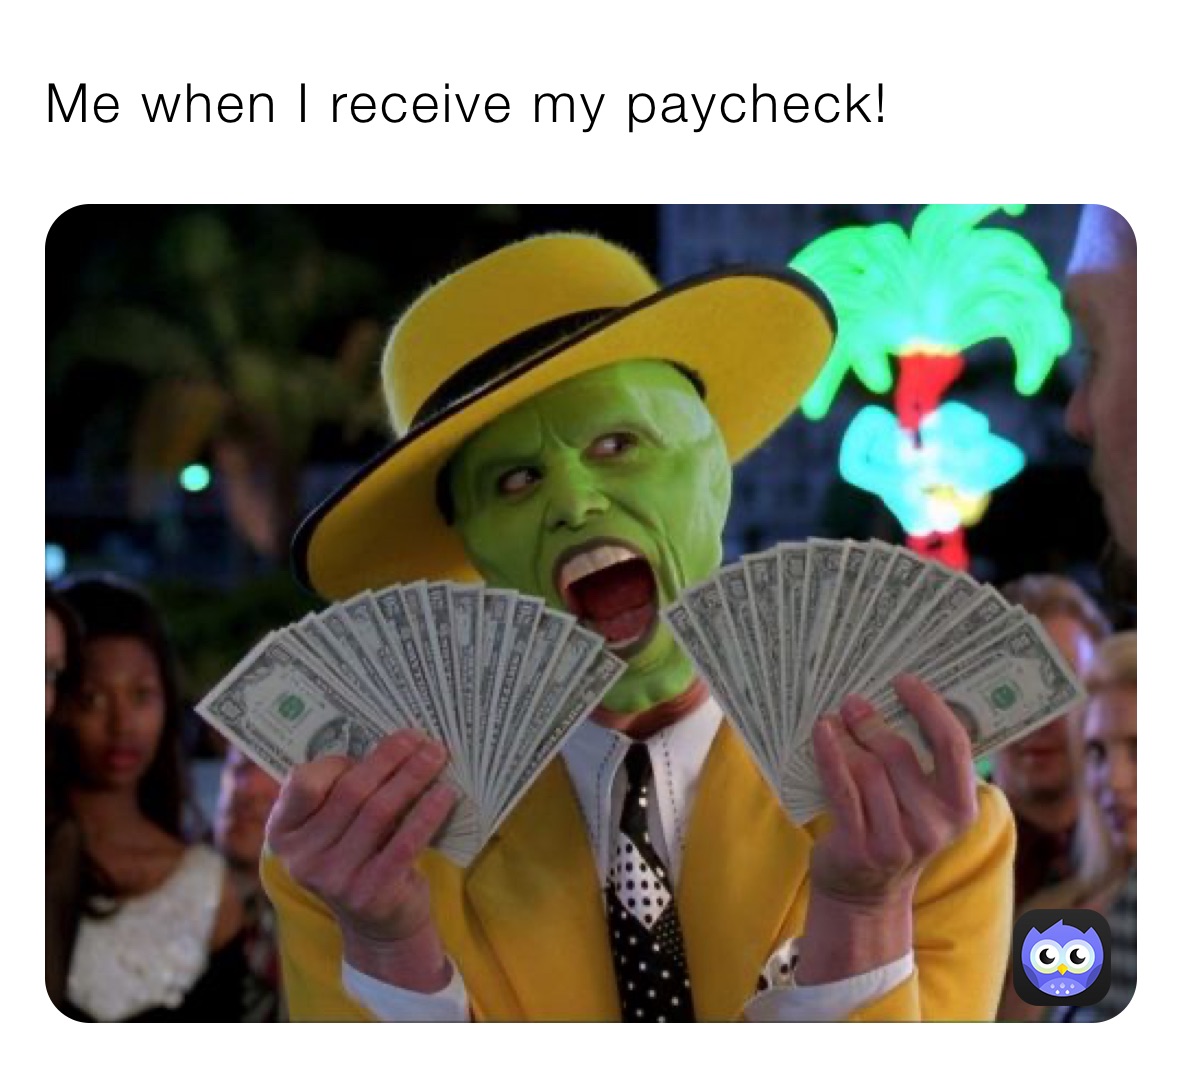 Me when I receive my paycheck!